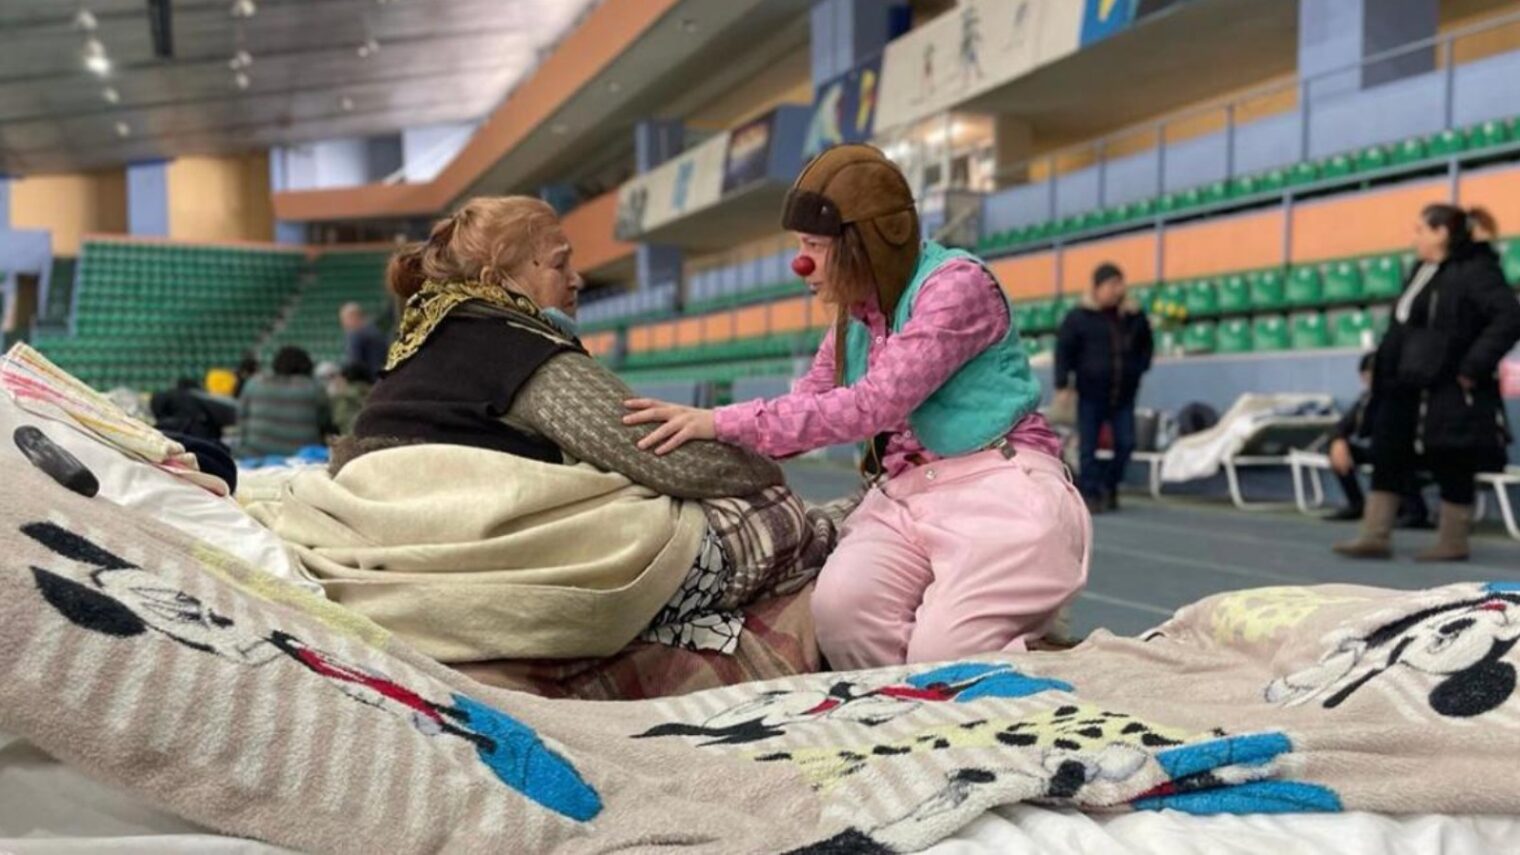 An Israeli medical clown comforting a displaced Ukrainian sheltering in a Moldovan stadium. Photo courtesy of Dream Doctors